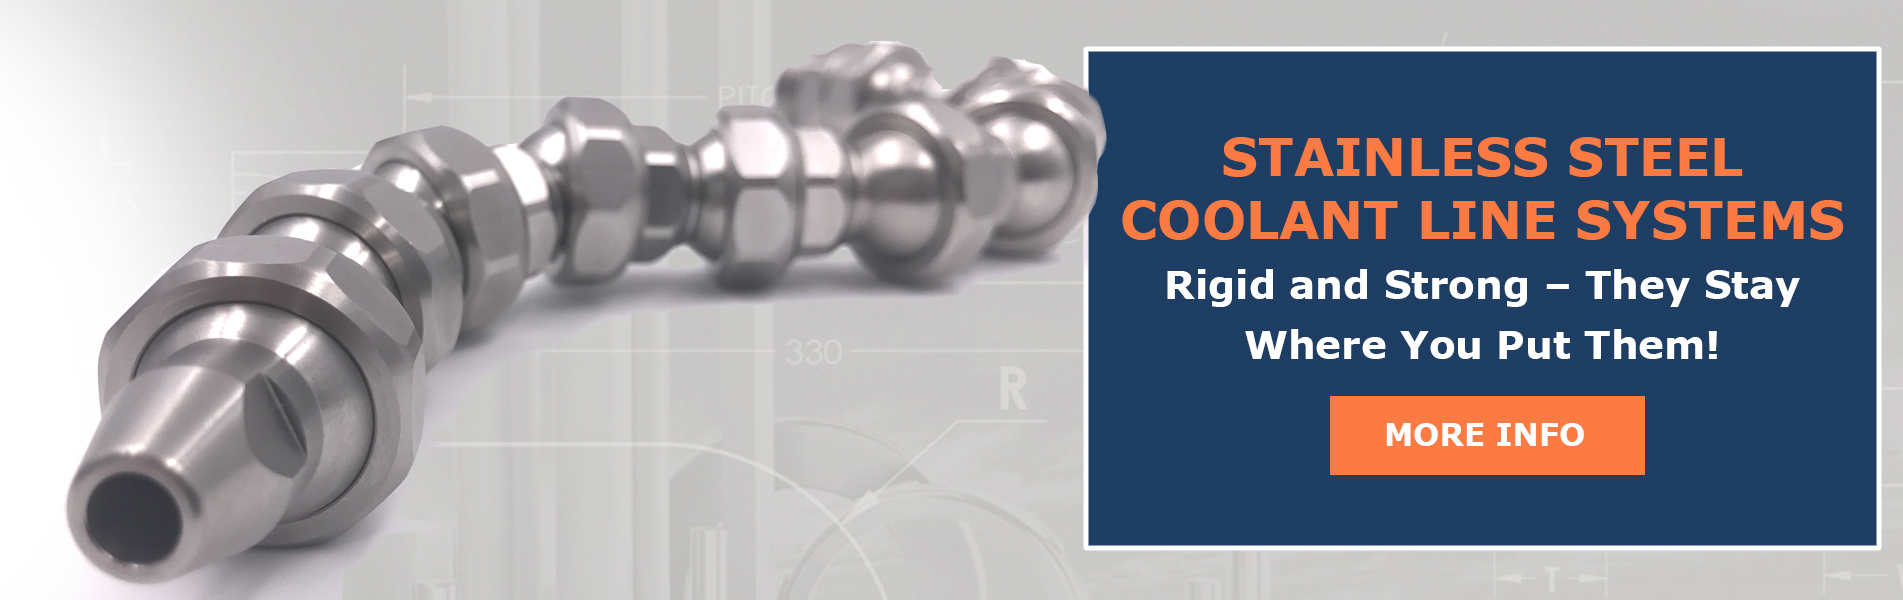 Stainless Steel Coolant Lines help improve machining and grinding operations.